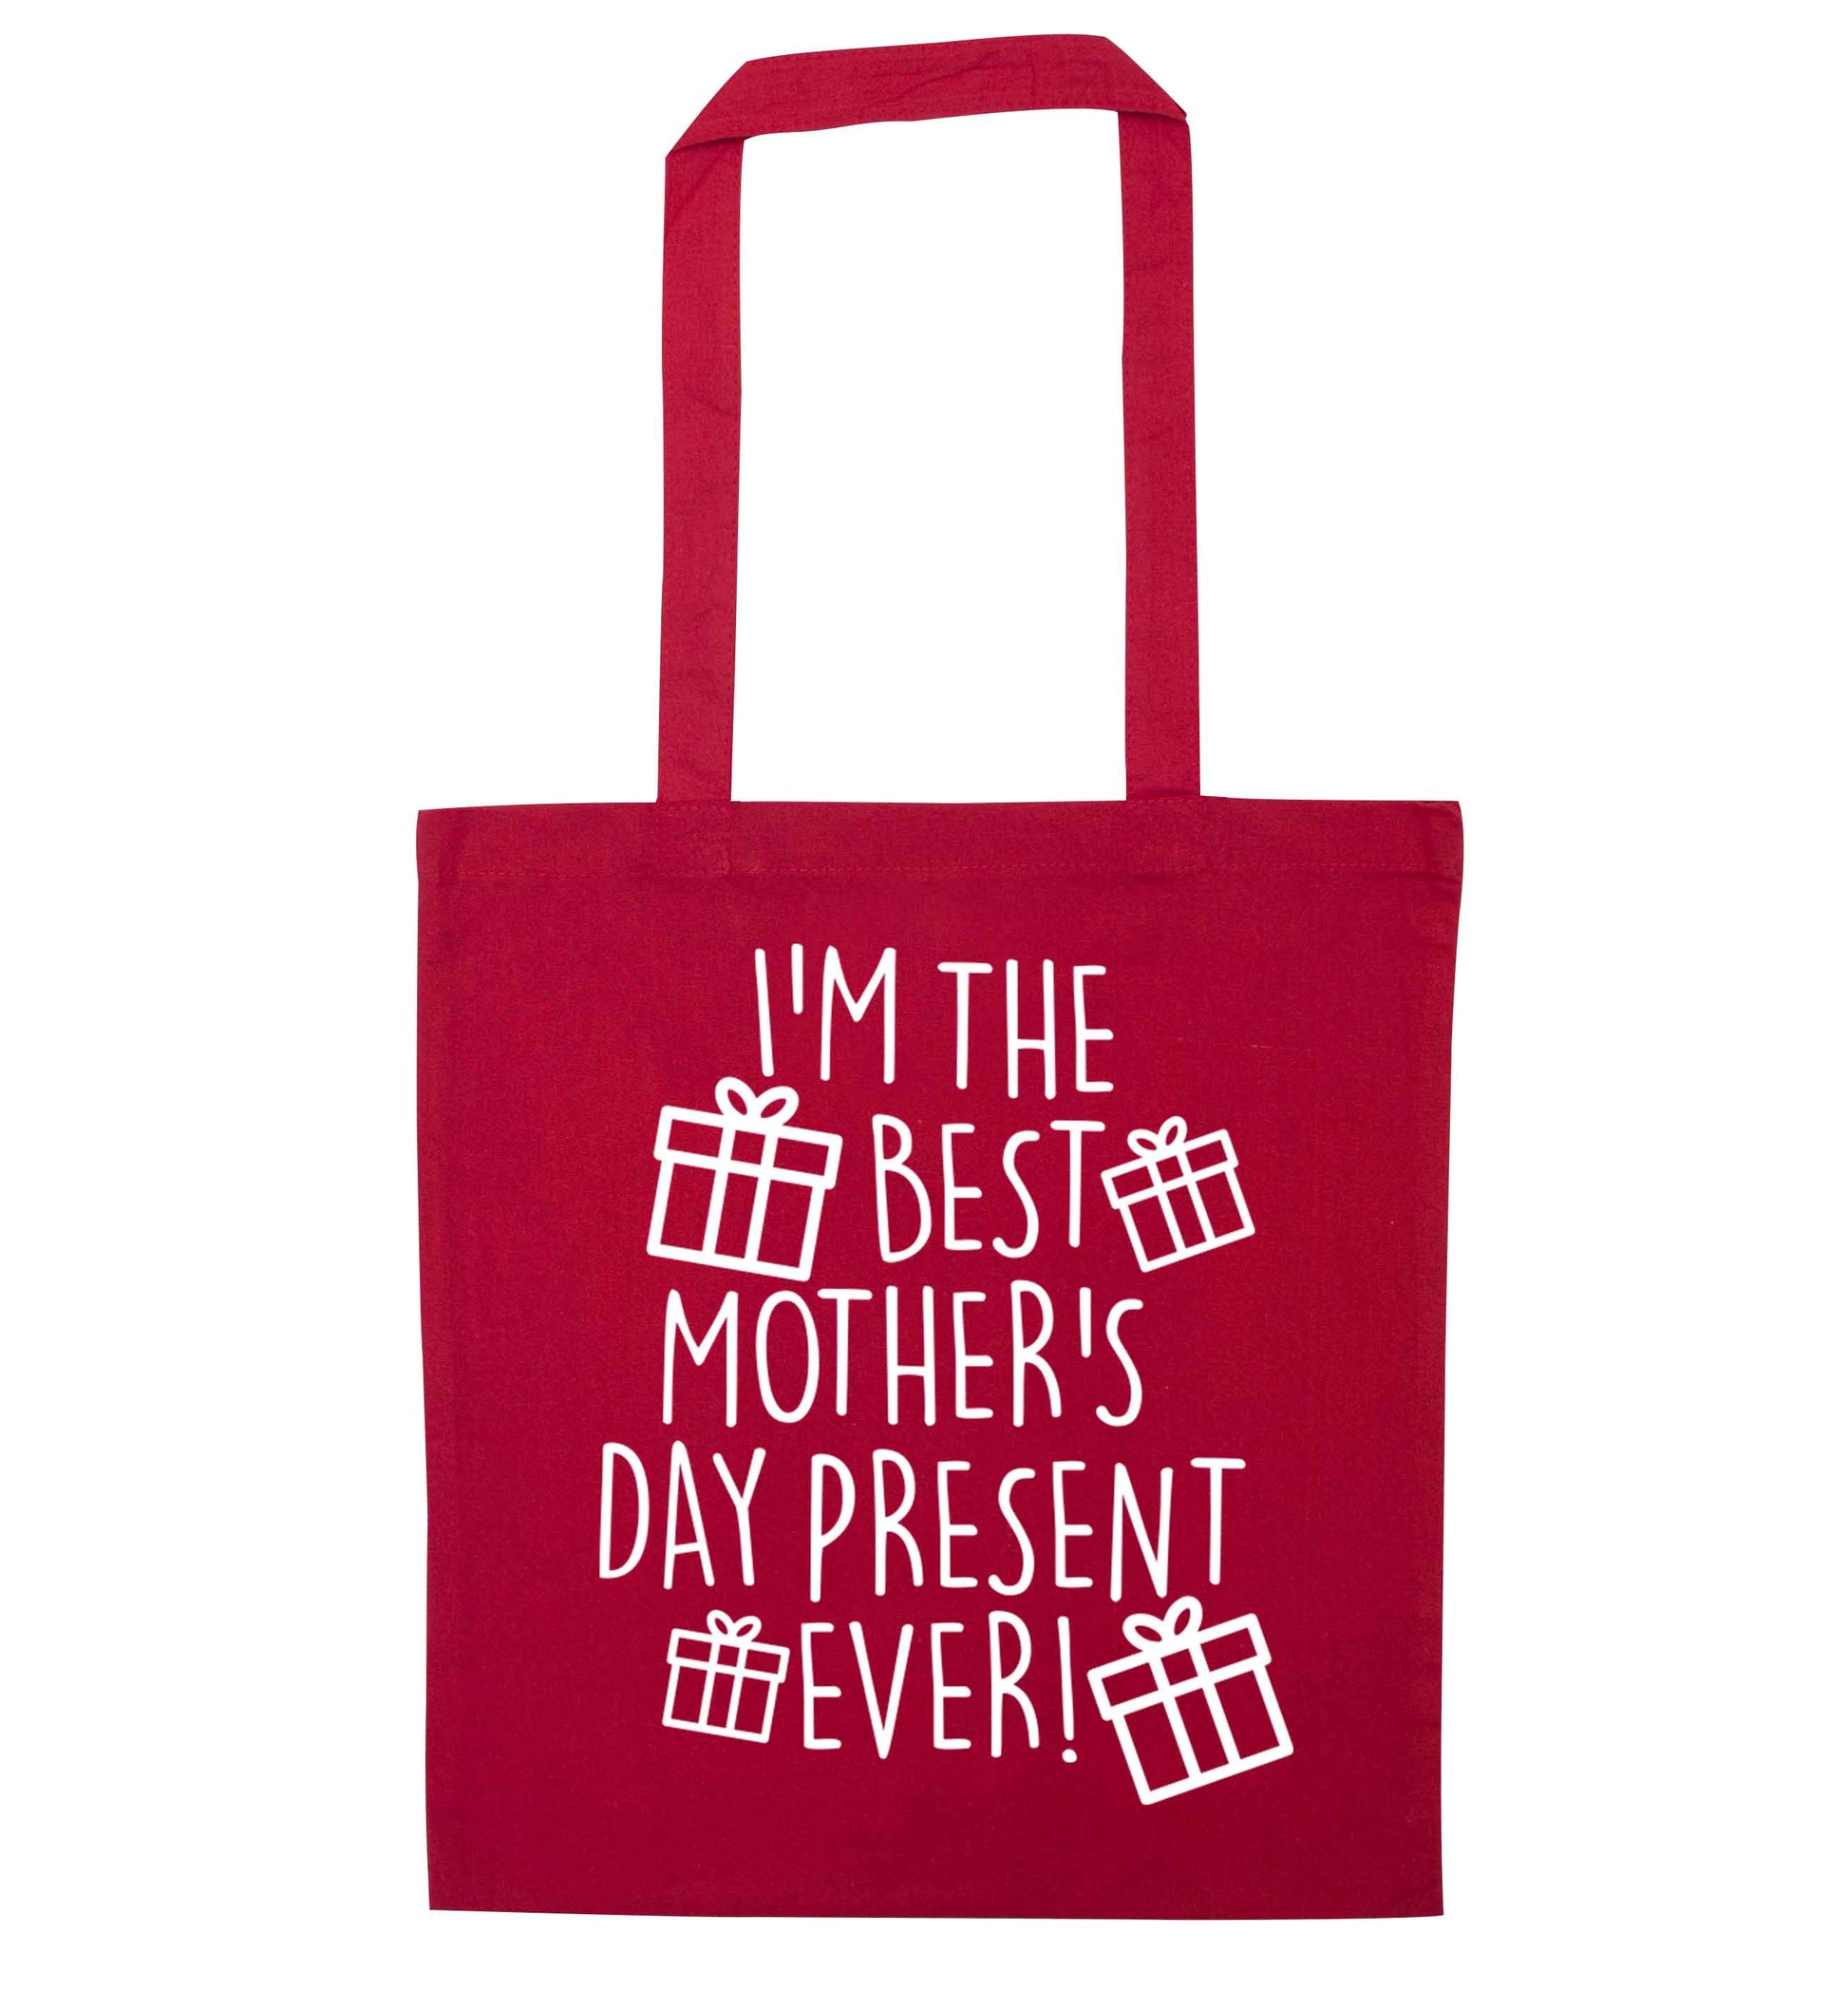 I'm the best mother's day present ever! red tote bag